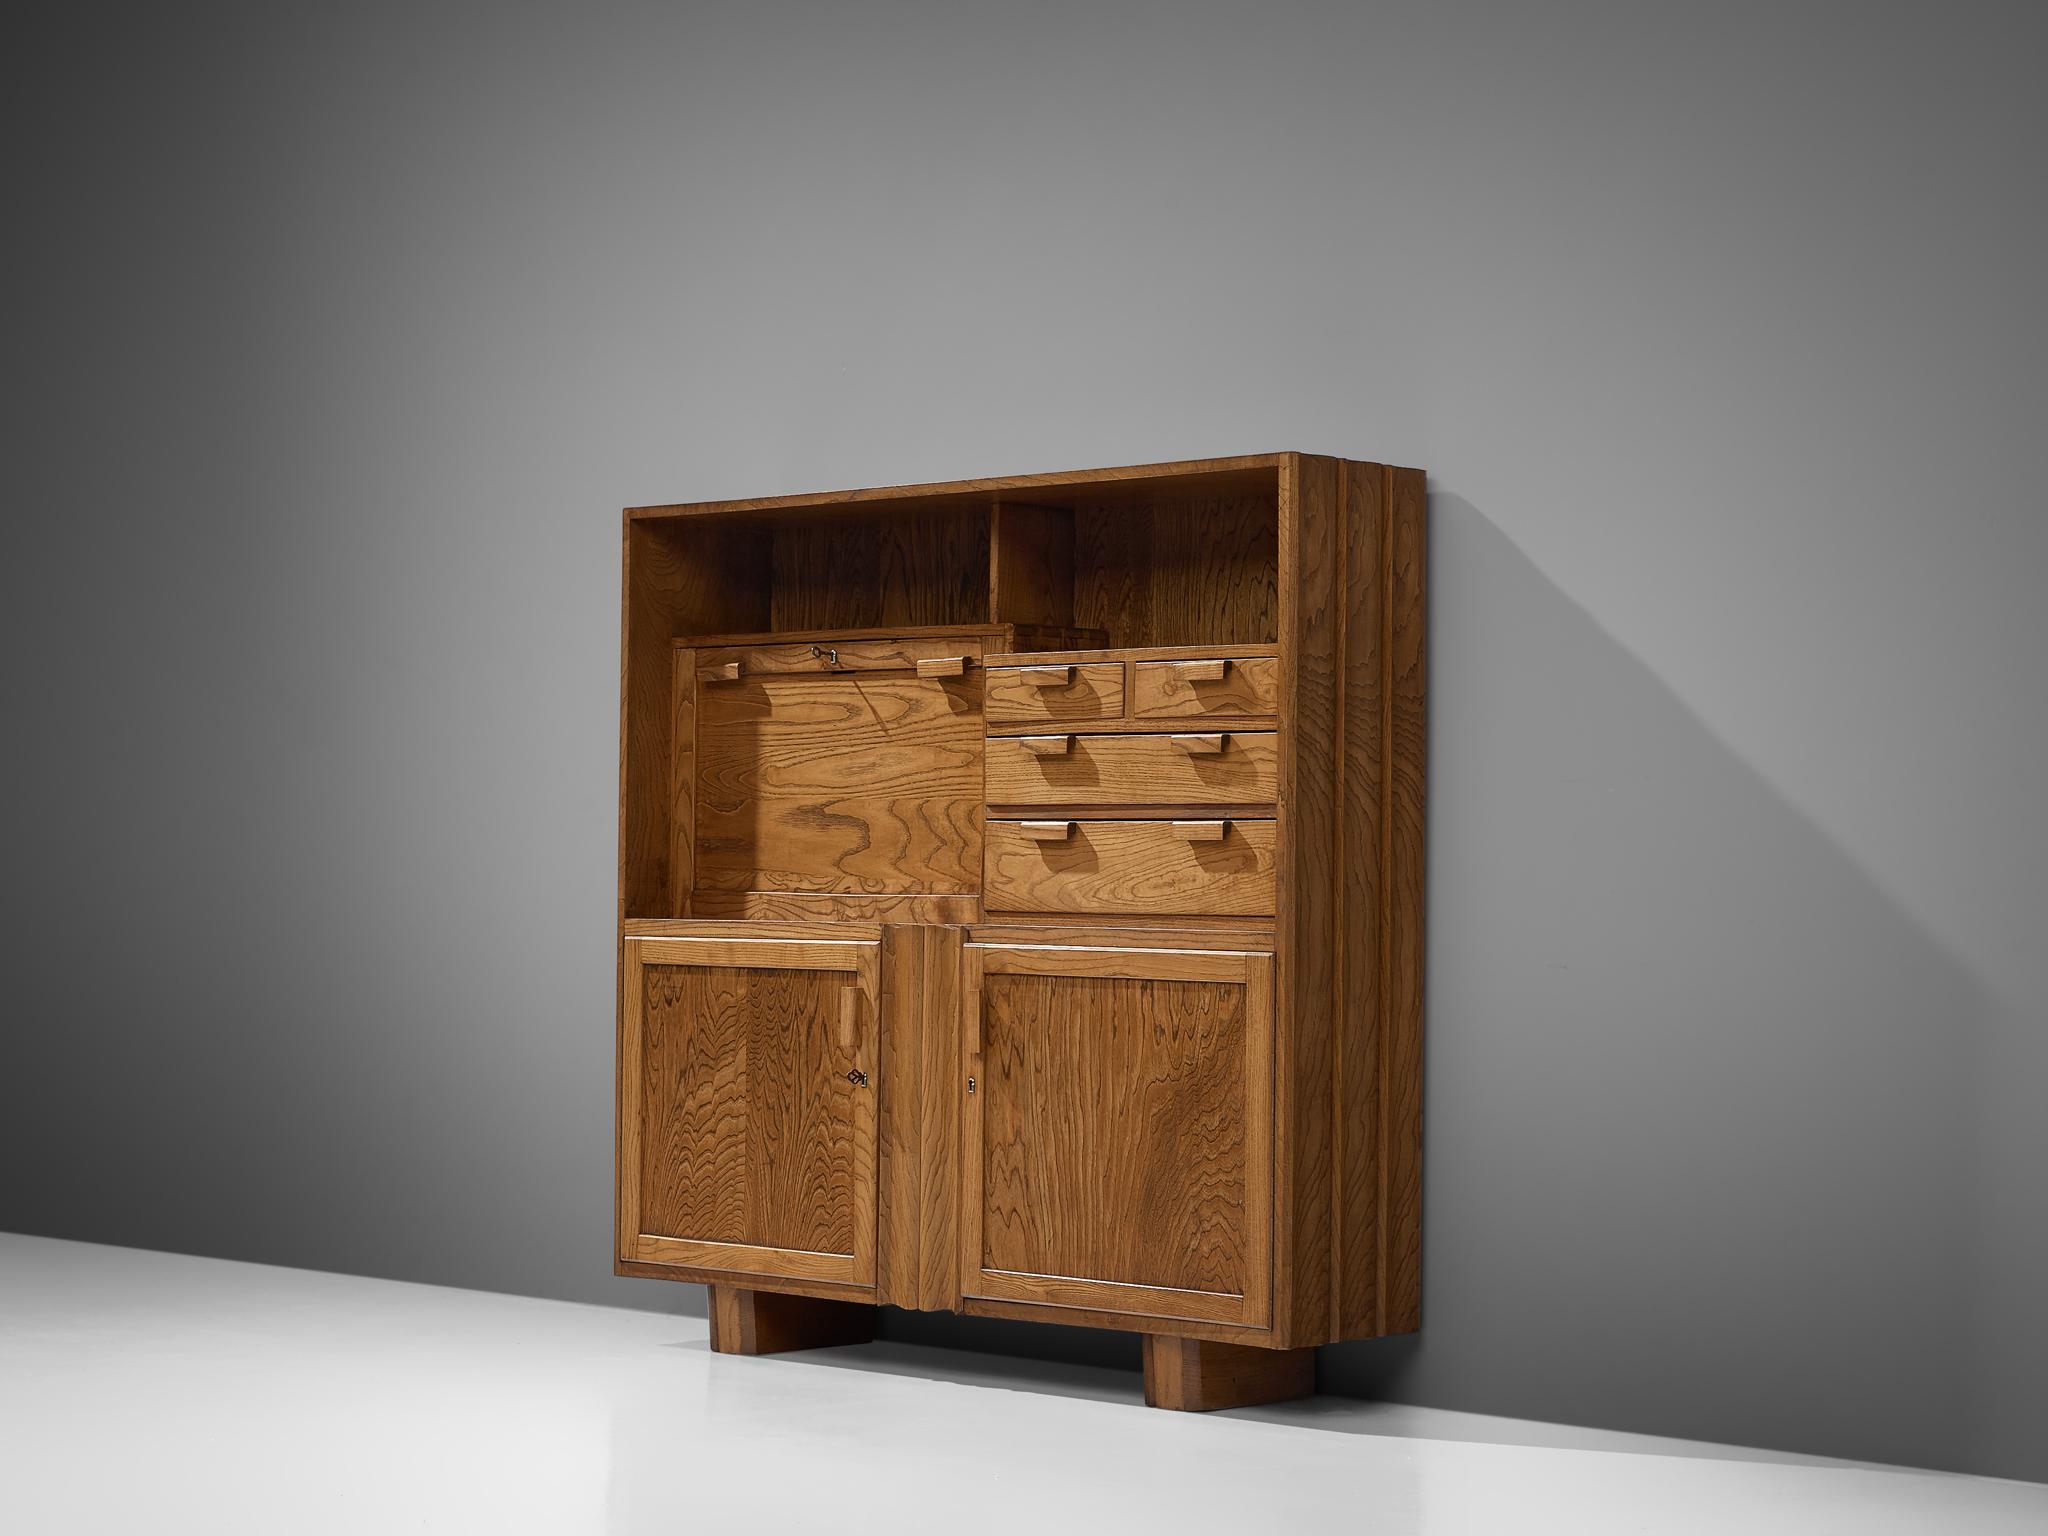 Cabinet, ash, France, 1960s

A French bookcase completely executed in ashwood. The cabinet features several storage compartments, with two doors, two shelves and four drawers. Besides, it also includes a folding desk table. Unfolding gives access to